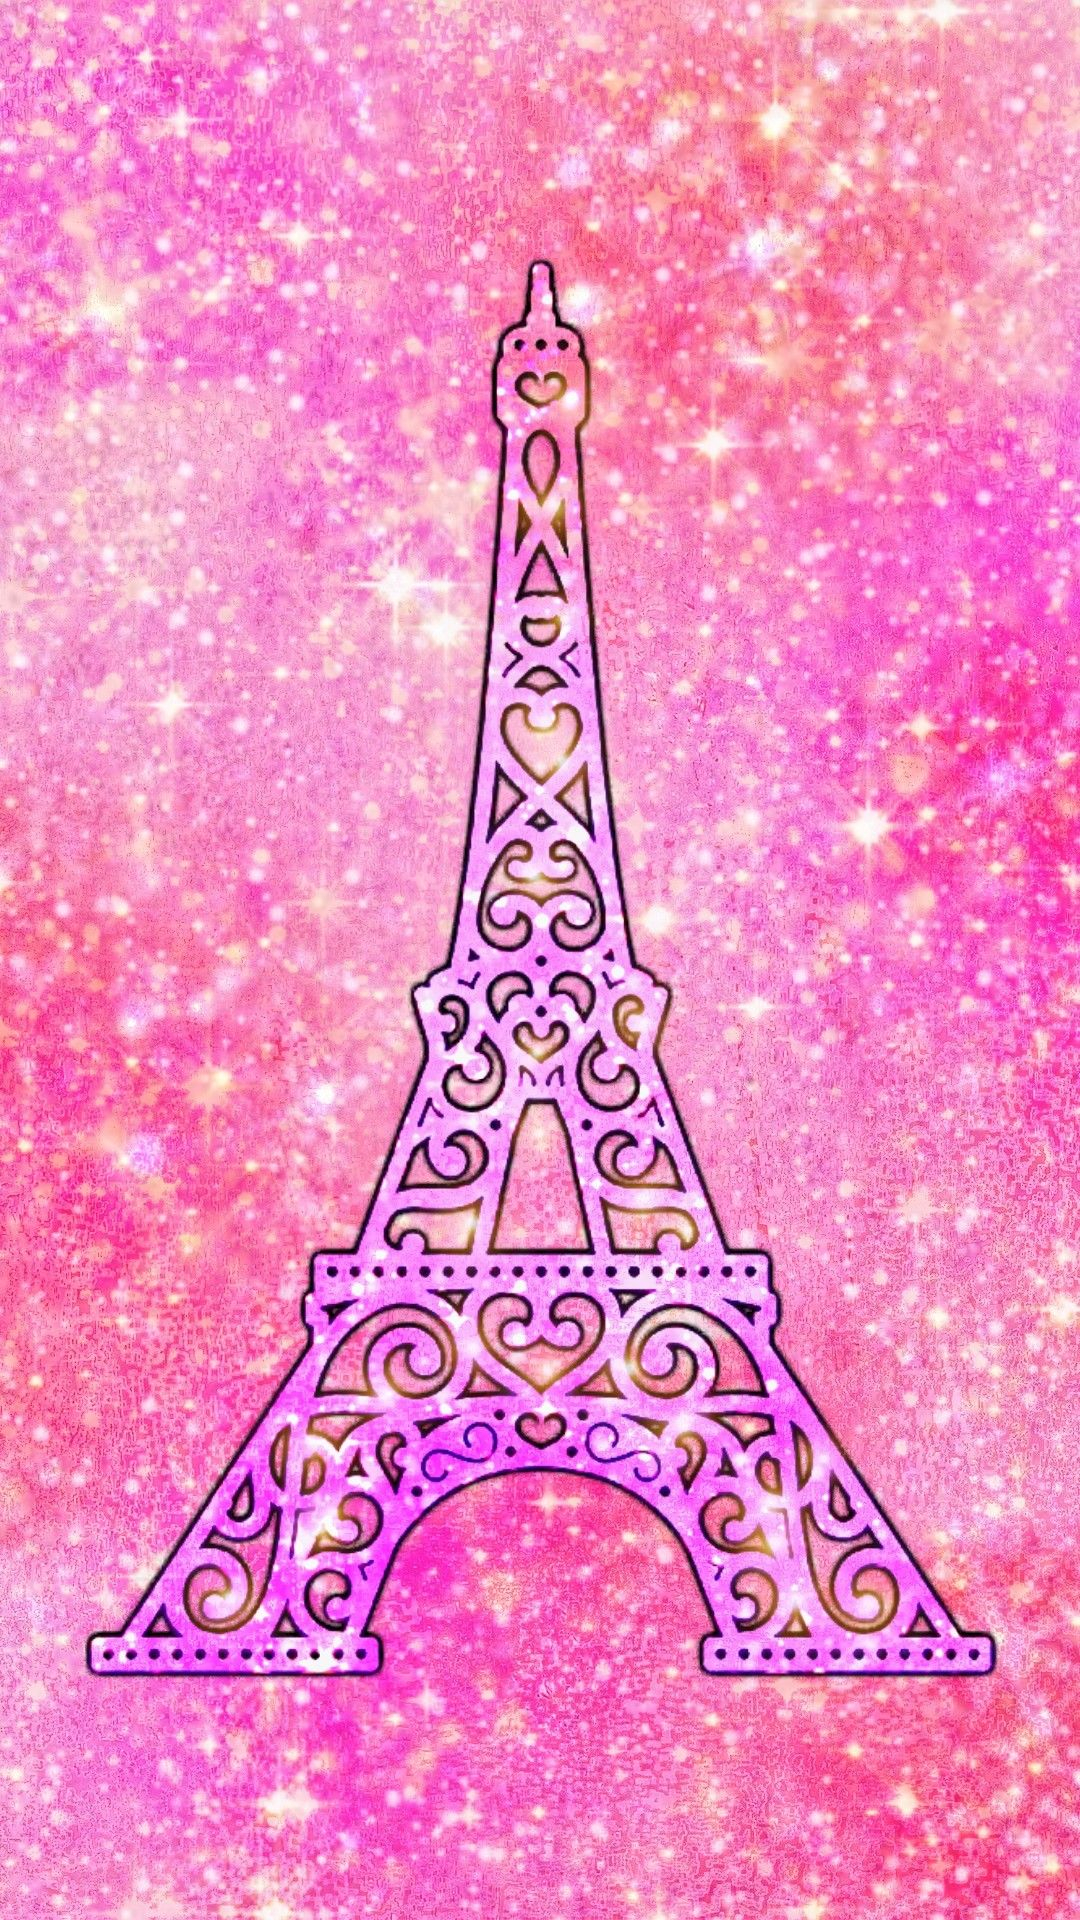 1080x1920 Pretty Pink Paris,made by me #paris #pink #wallpapers #glitter #sparkles #backgrounds #eiffeltower | Fondos